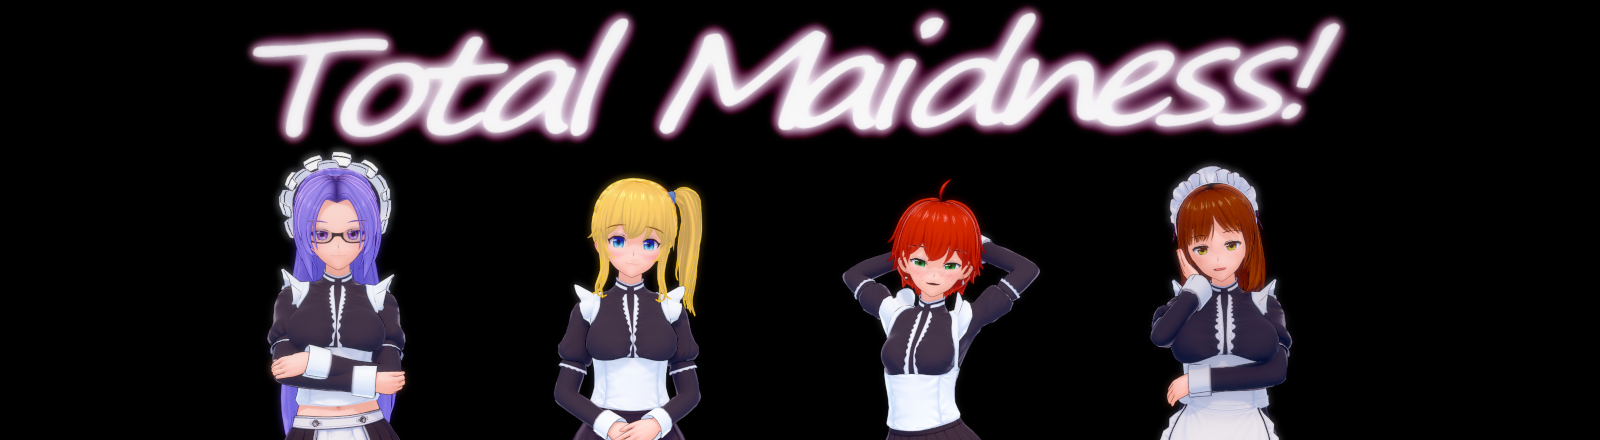 Total Maidness! poster